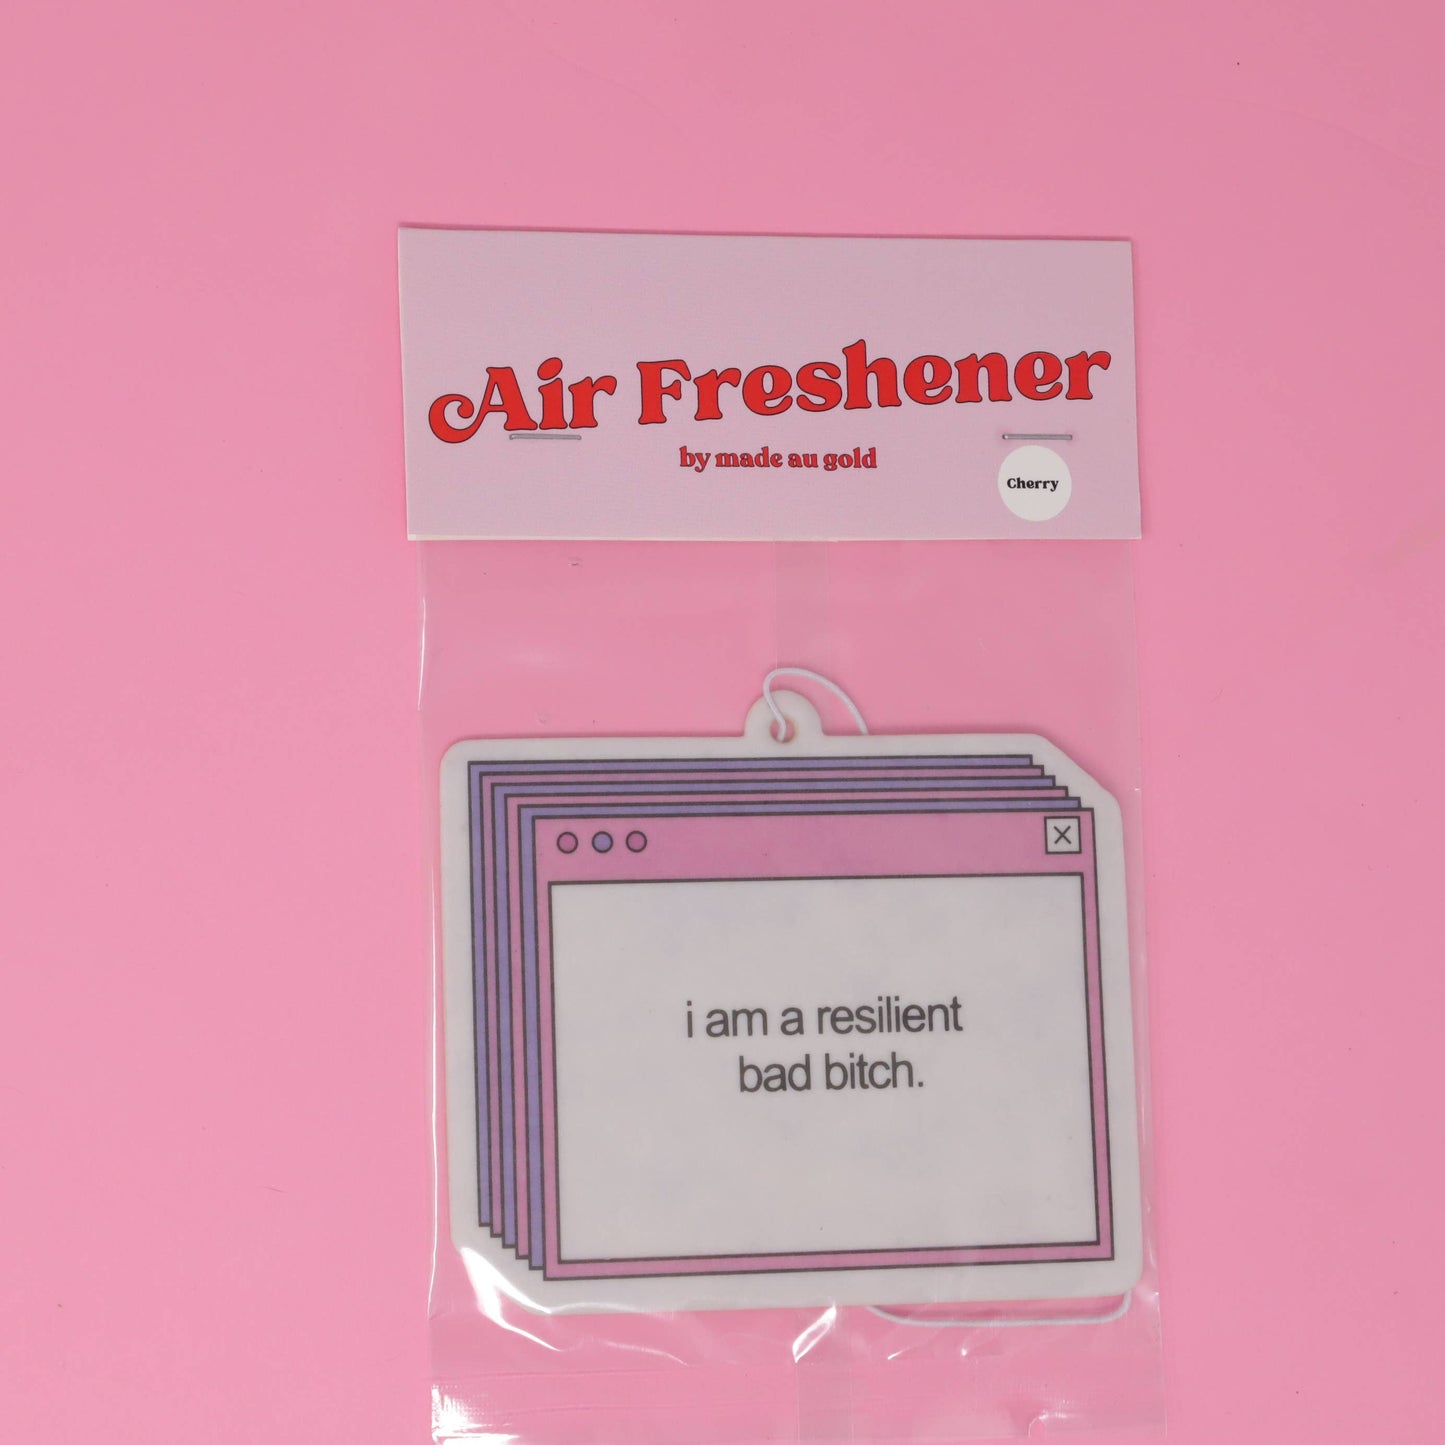 Airfreshener I am a resilient bitch